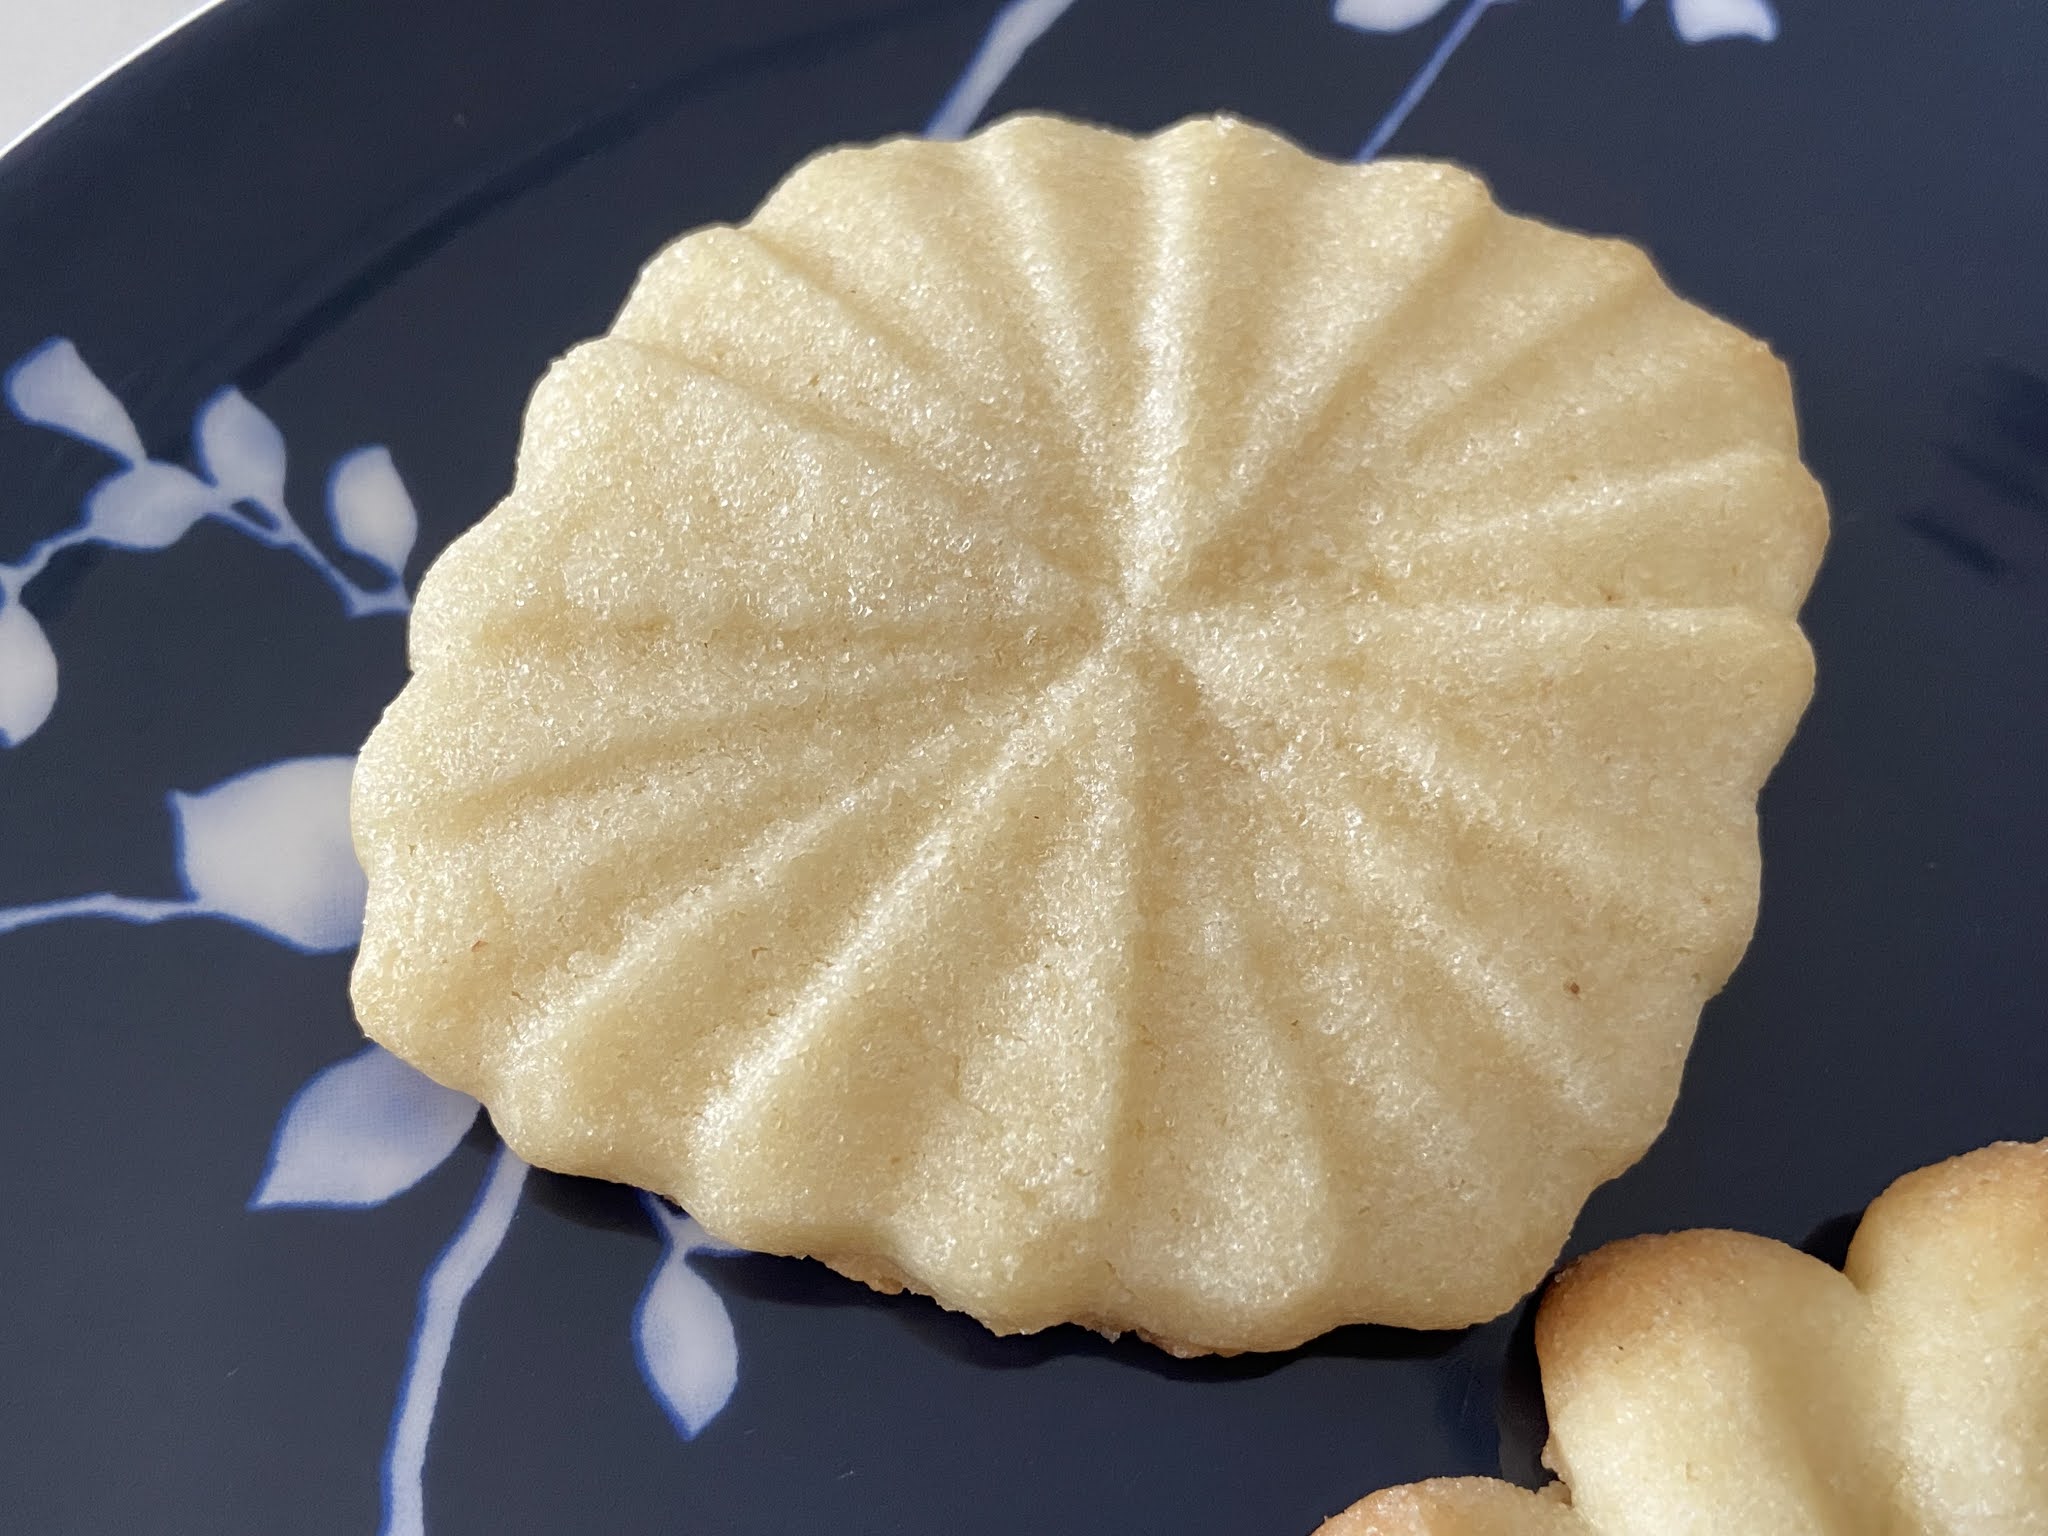 Melt-In-Your-Mouth Shortbread Stamped Cookies - Veena Azmanov